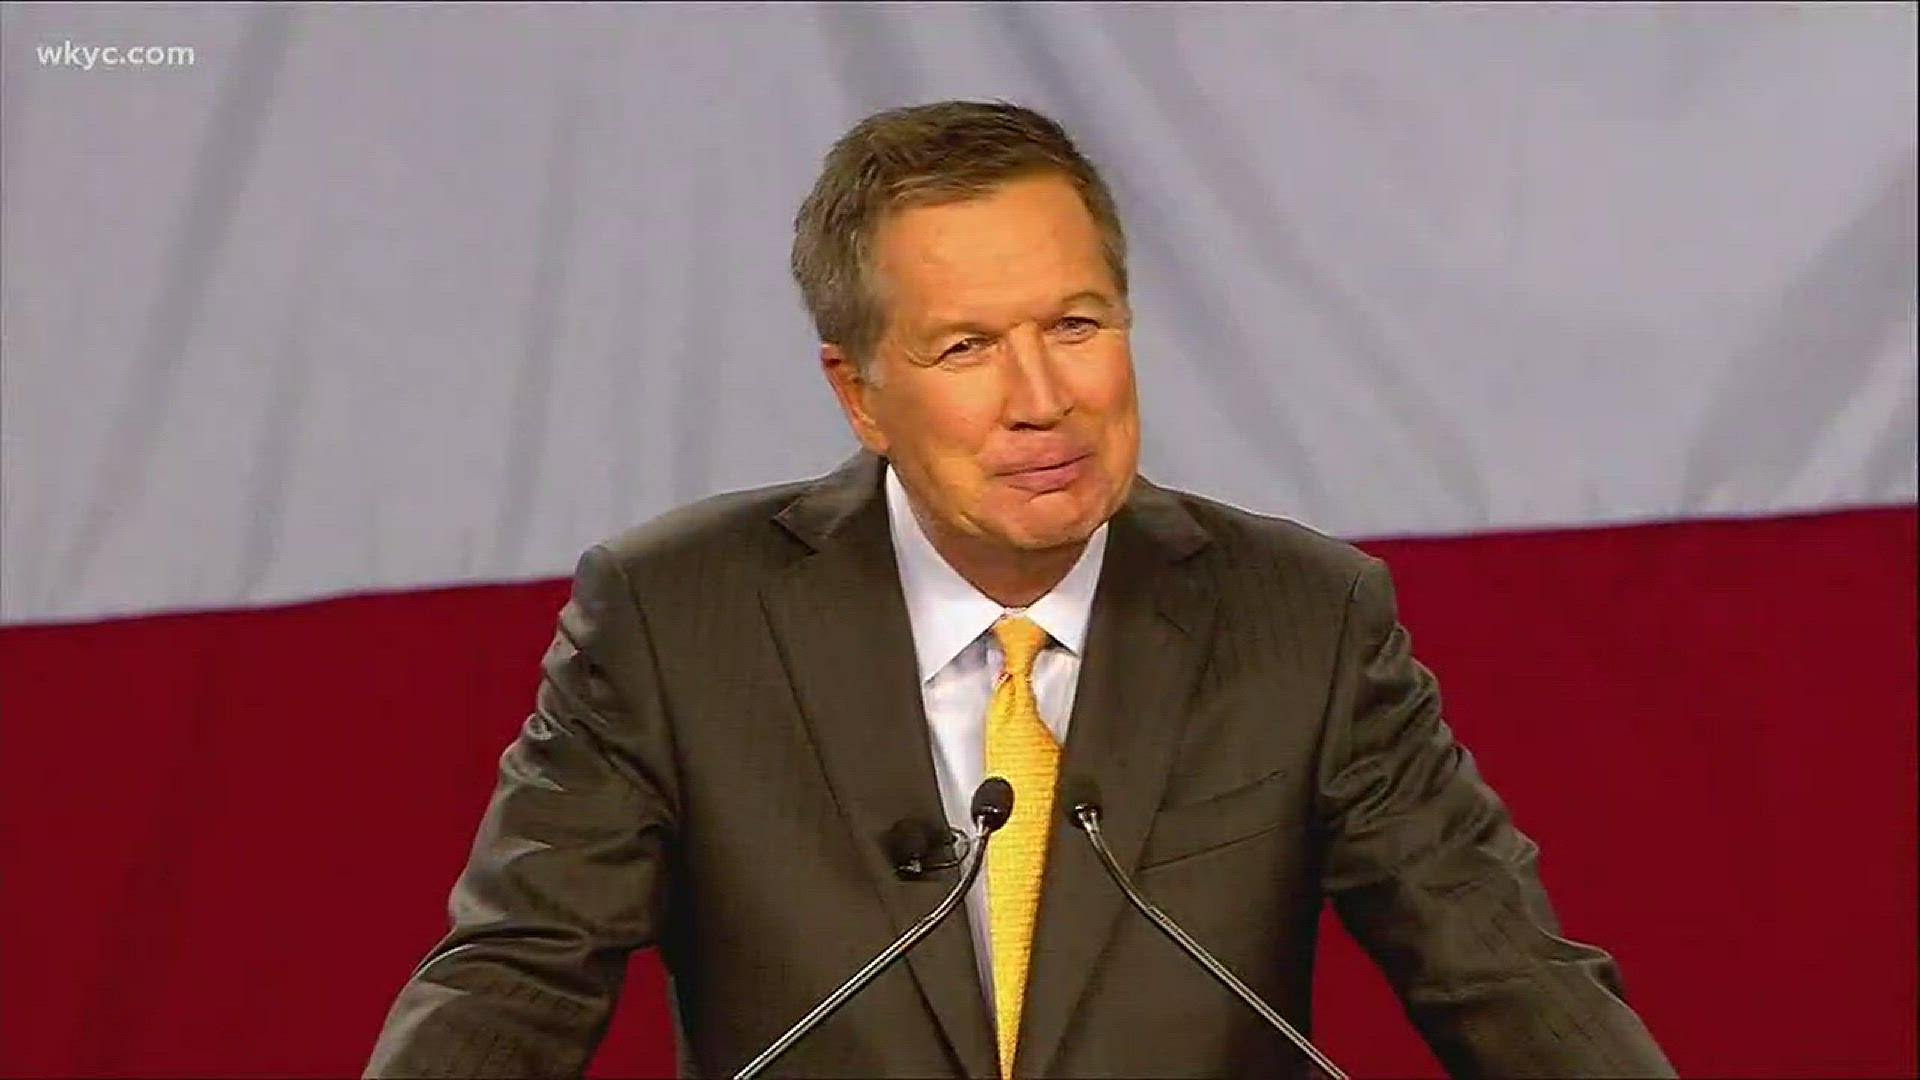 March 6, 2018: Tonight is the night for Ohio Gov. John Kasich's final 'State of the State' speech.